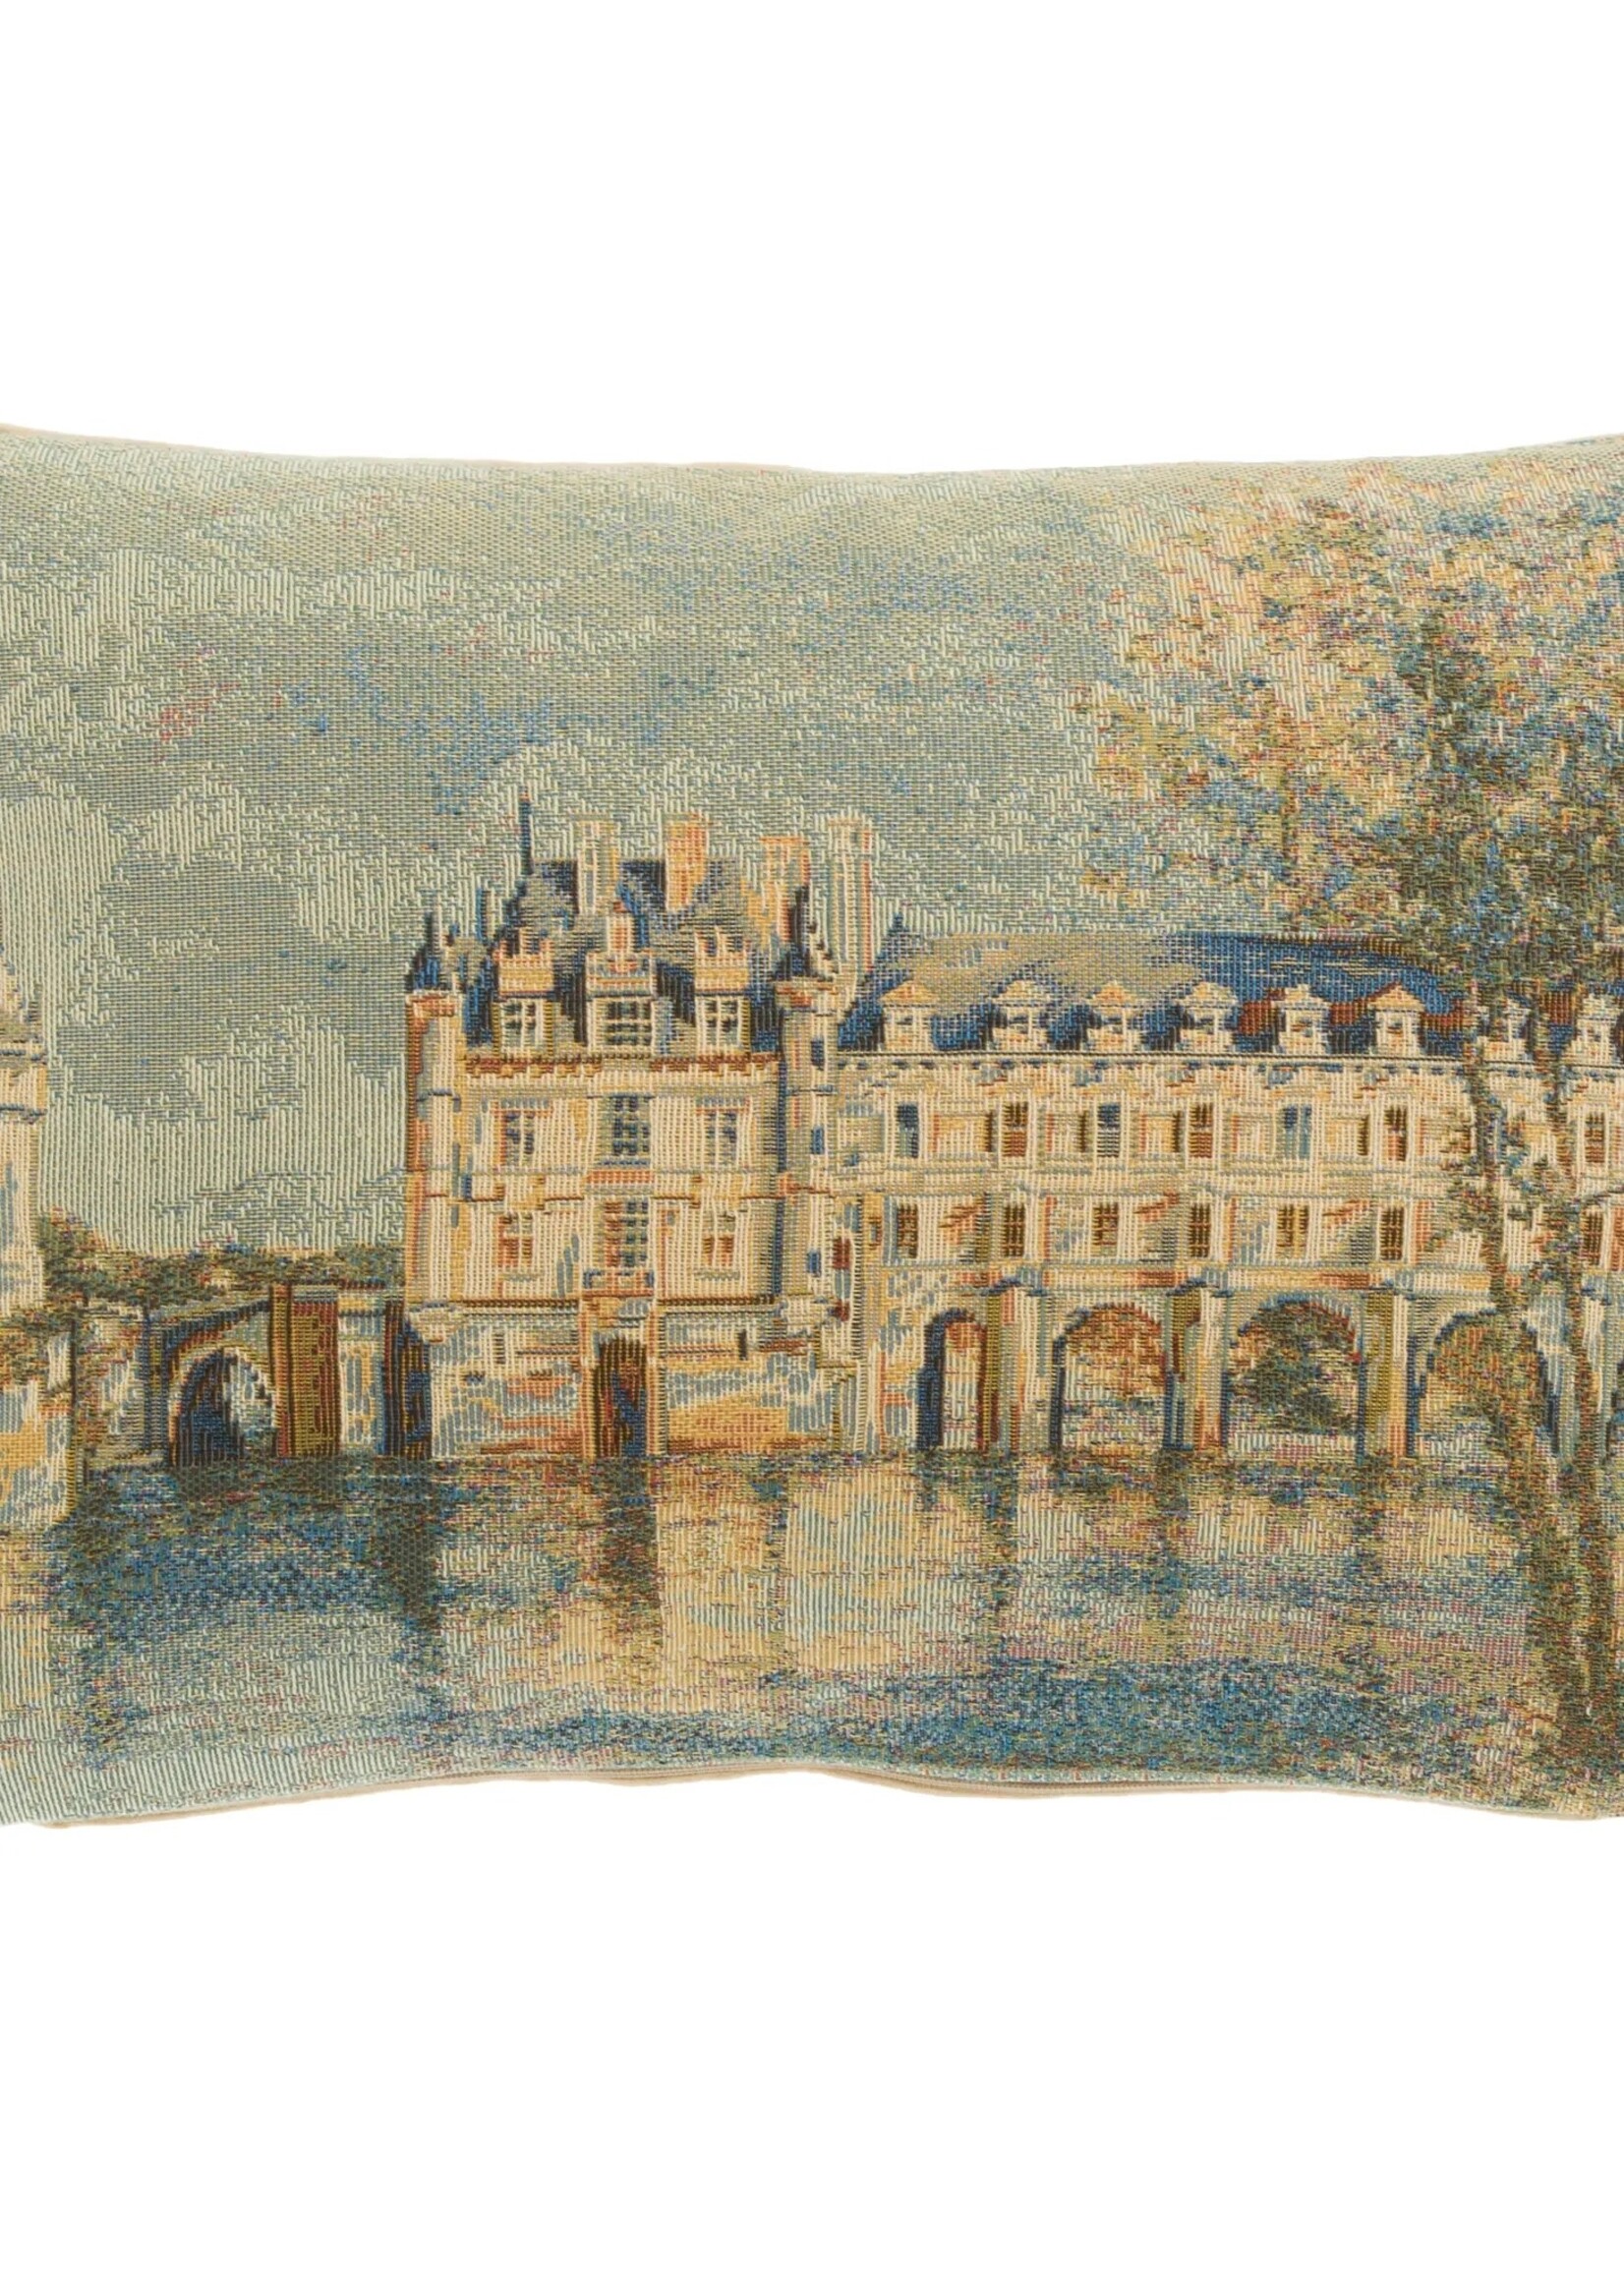 Pillow with Insert - Chenonceau Castle